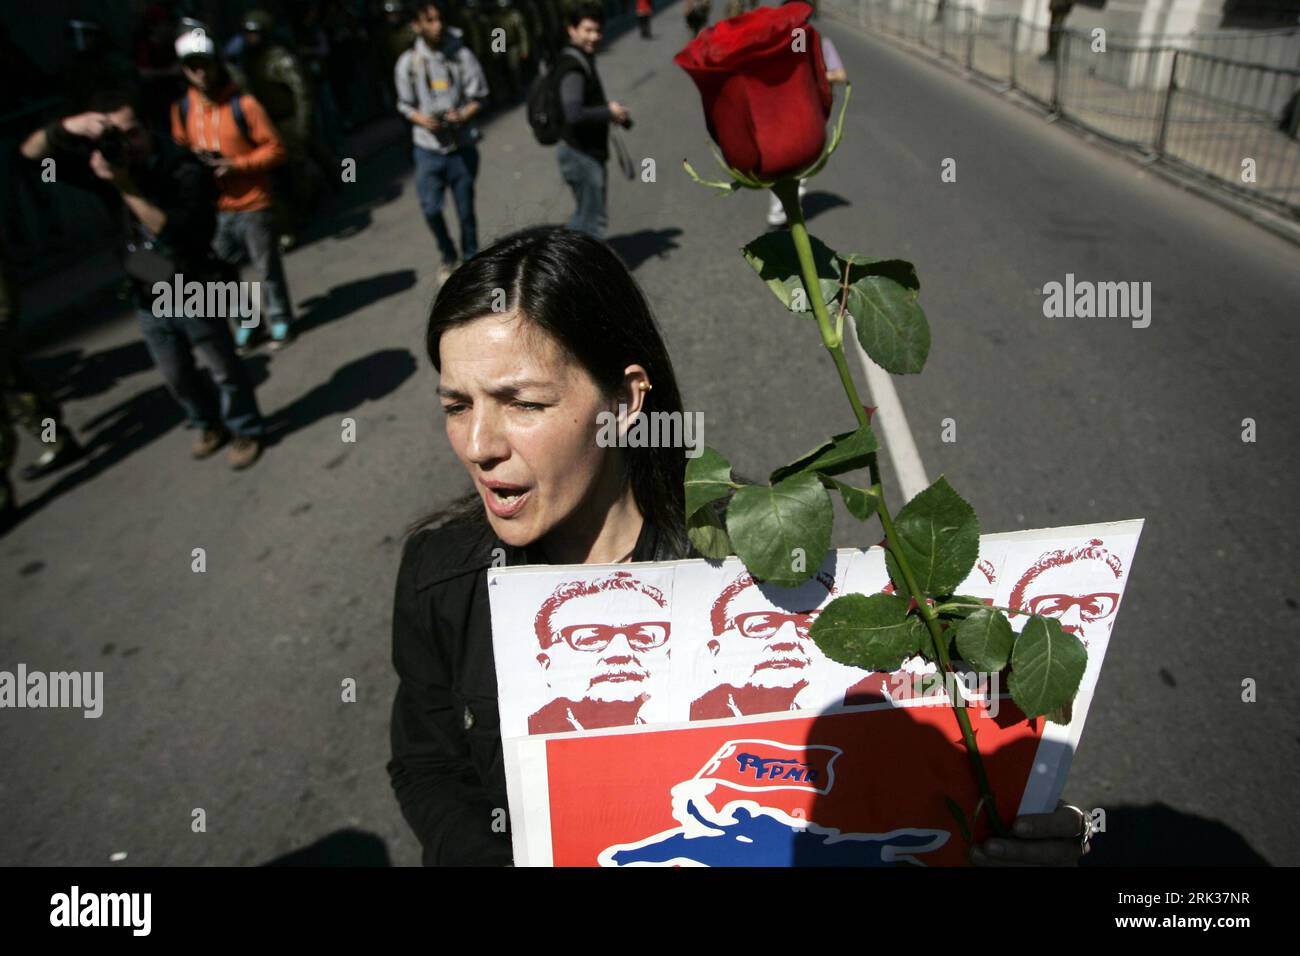 Bildnummer: 53348541  Datum: 11.09.2009  Copyright: imago/Xinhua (090912) -- SANTIAGO, Sept. 12, 2009 (Xinhua) -- A woman carries a flower and a poster with the image of former Chilean President Salvador Allende, during a rally marking the 36th anniversary of the coup that ousted president Salvador Allende and brought General Augusto Pinochet to power, in Santiago, capital of Chile, Sept. 11, 2009. (Xinhua/Danny Alveal Aravena)(axy) (1)CHILE-SANTIAGO-COUP-ANNIVERSARY PUBLICATIONxNOTxINxCHN kbdig xkg 2009 quer premiumd o0 Gedenken, Opfer, Diktatur, Jahrestag, Staatsstreich, Demo    Bildnummer 5 Stock Photo